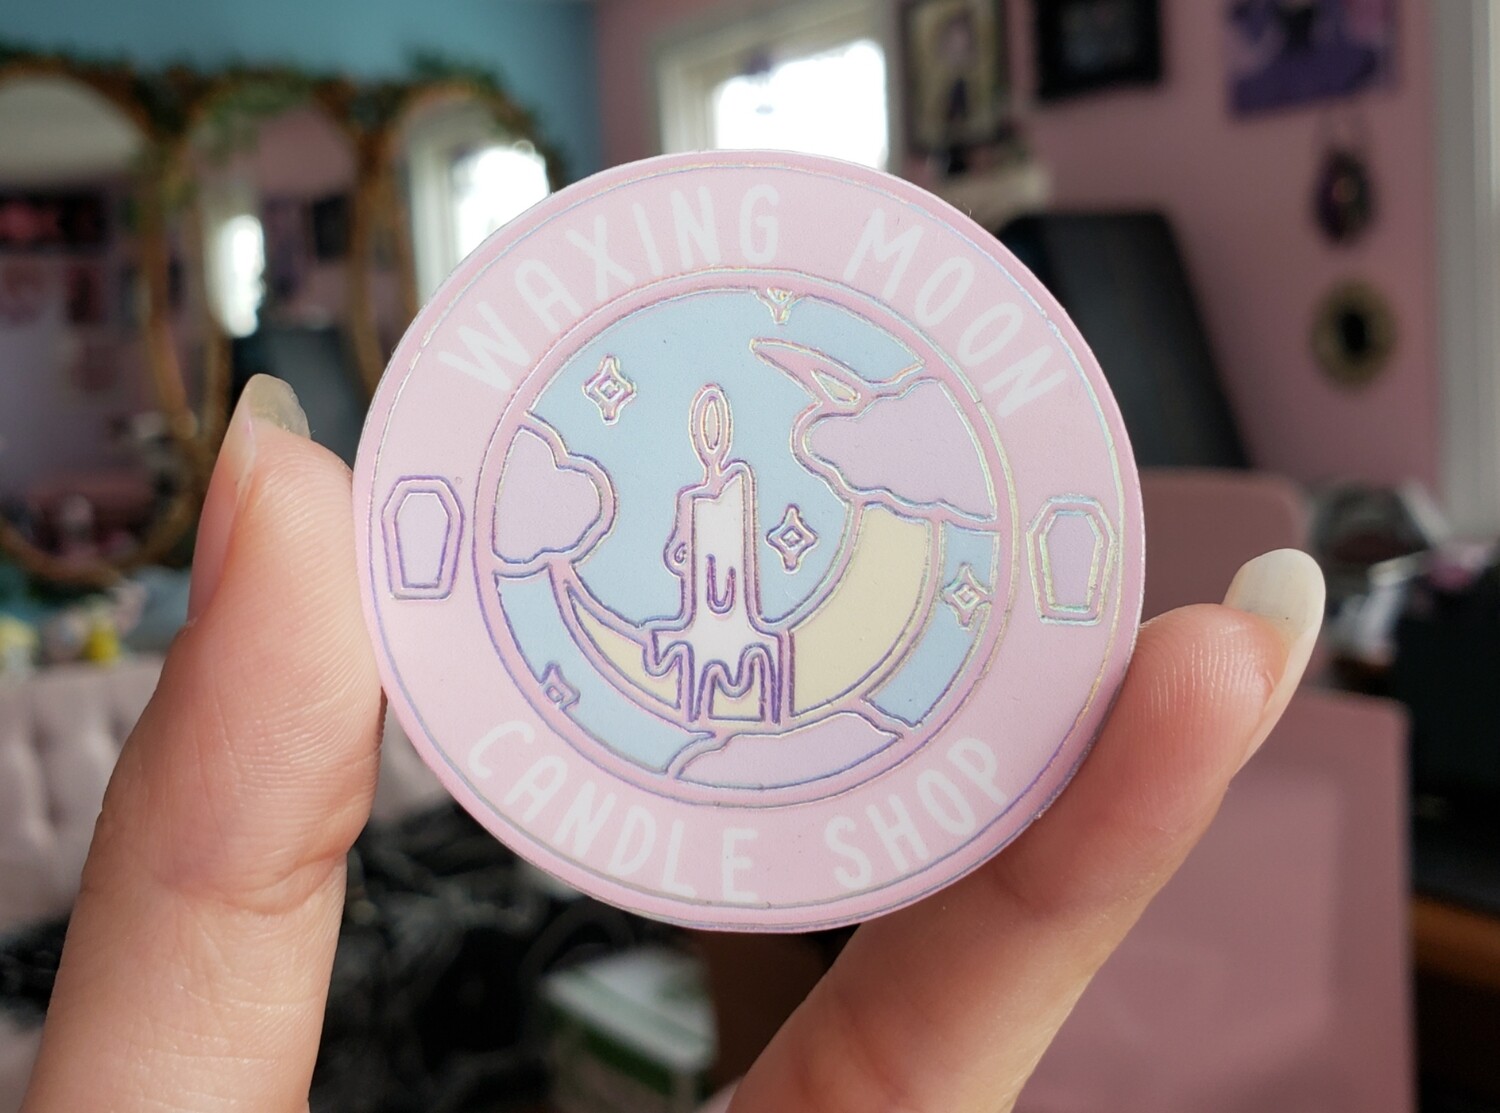 Waxing Moon Candle Shop Logo Sticker (with foil)